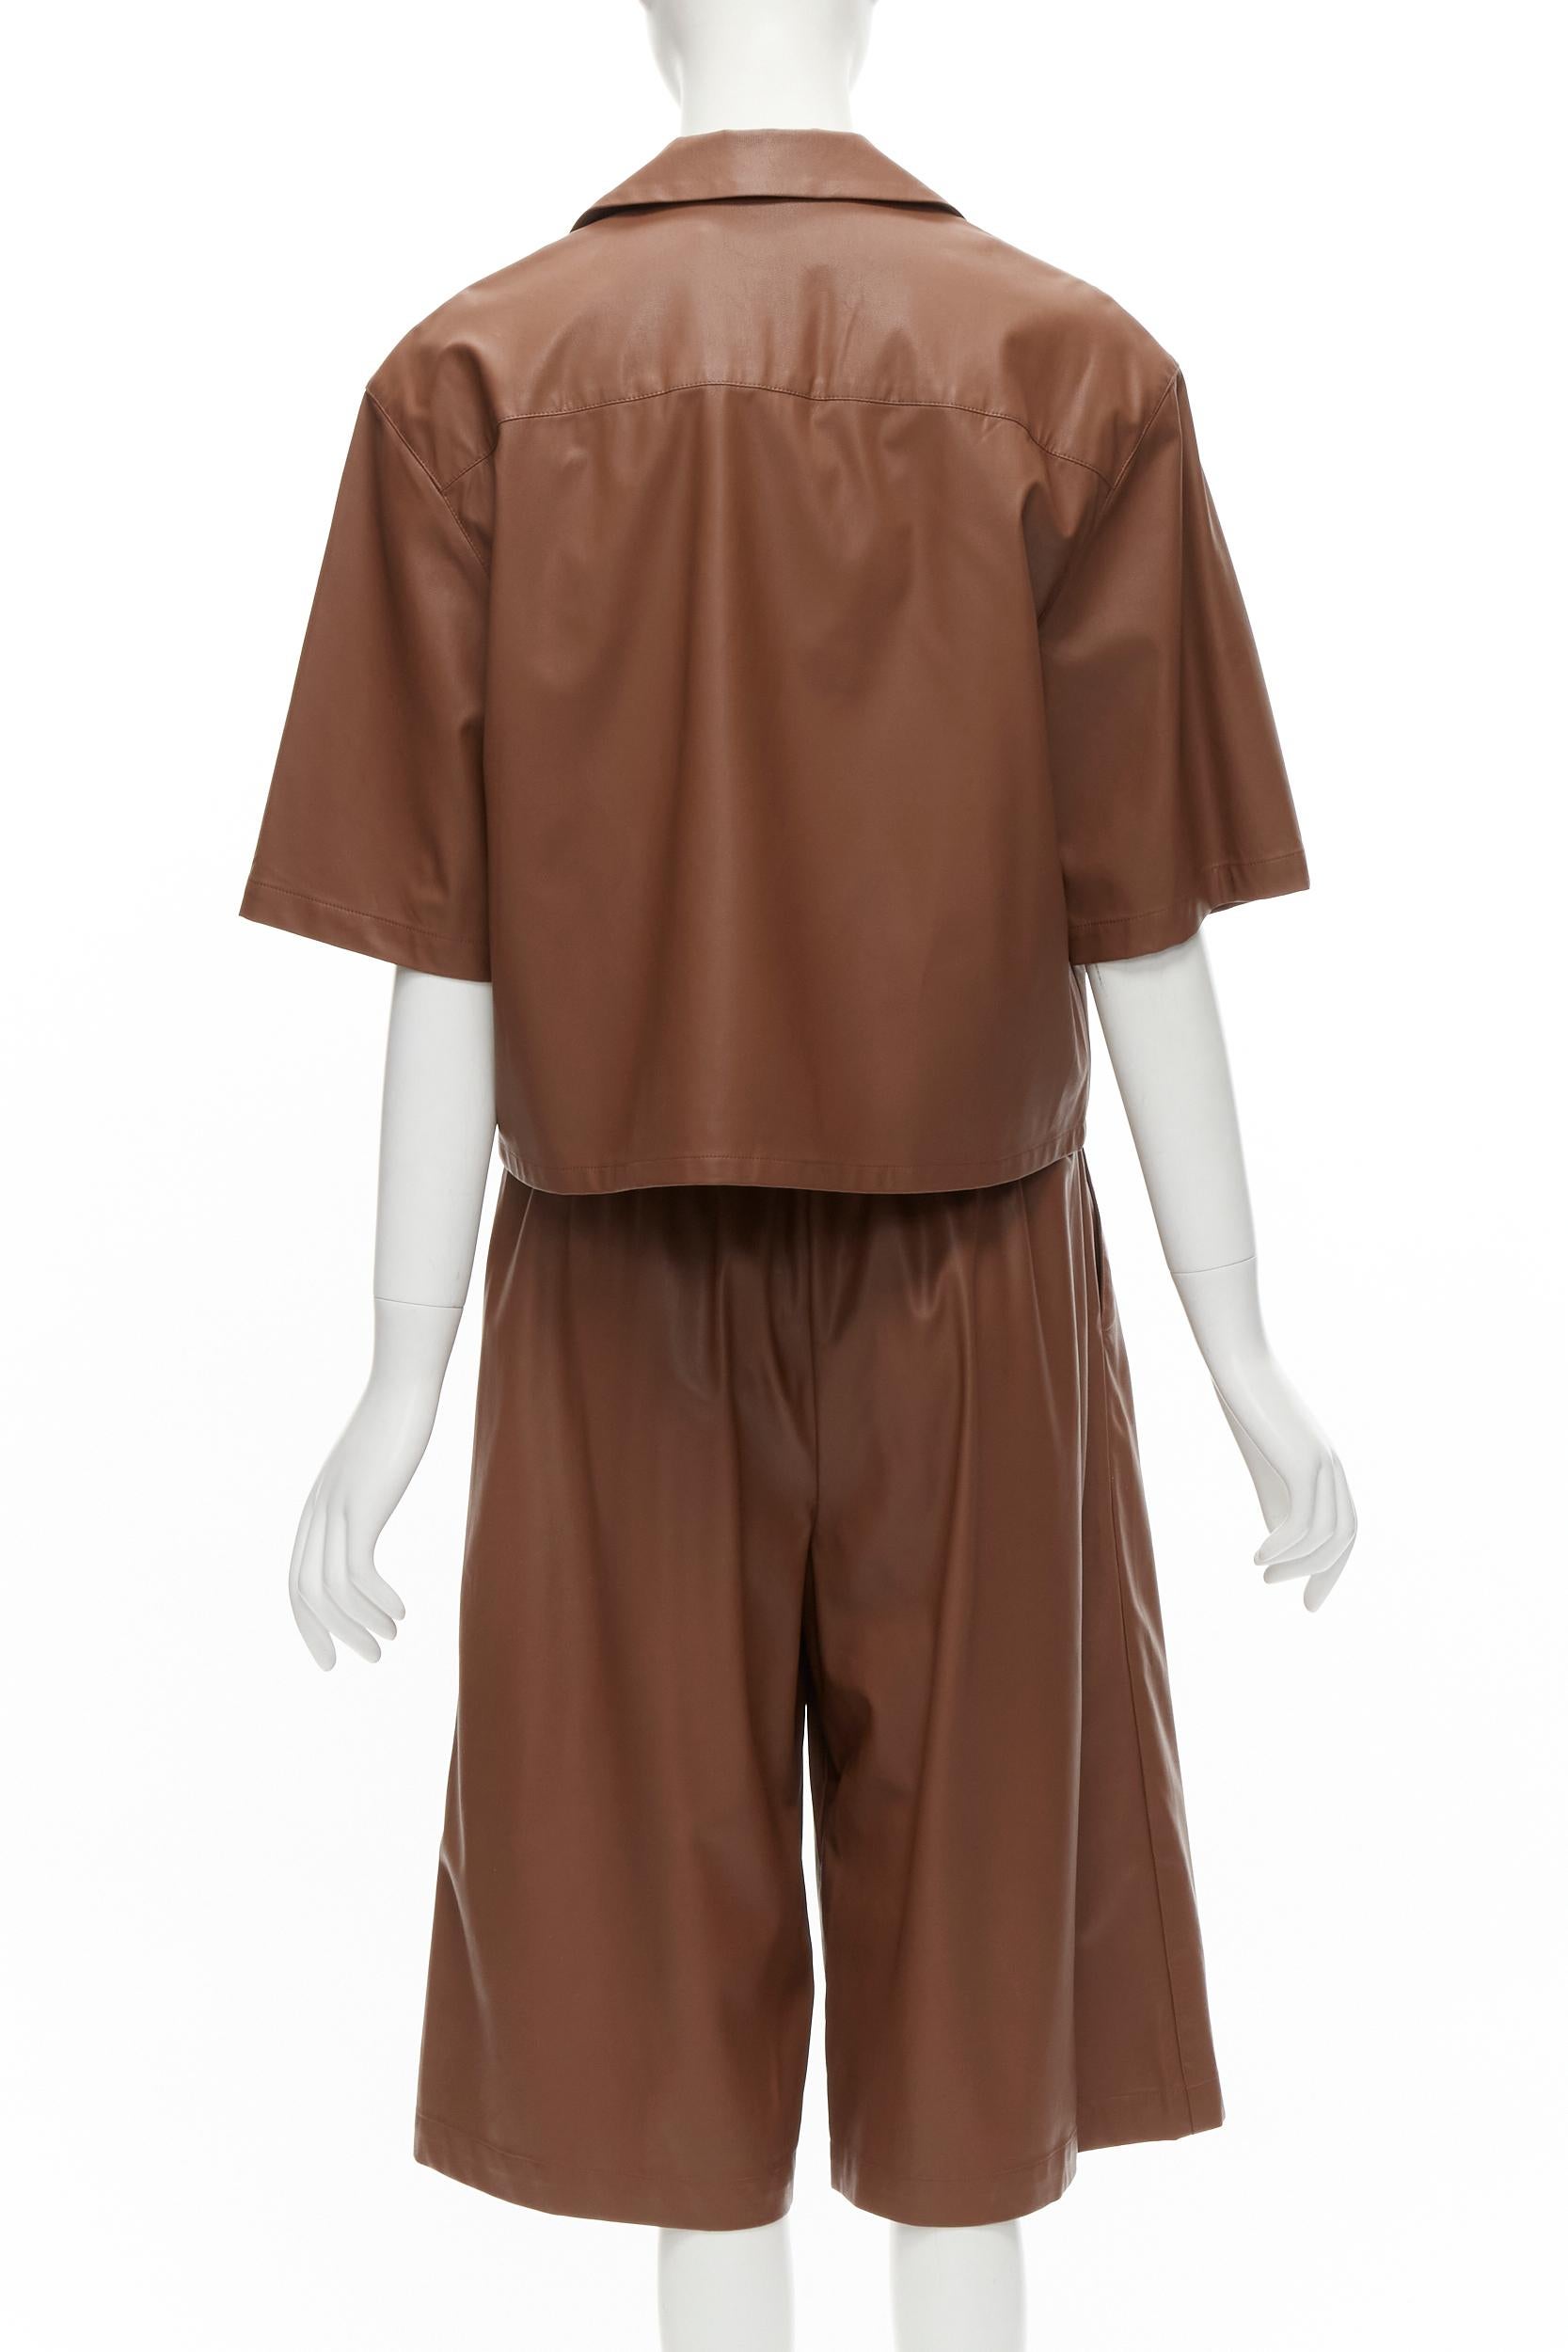 TIBI brown faux leather boxy fit shirt culotte wide shorts S In Excellent Condition For Sale In Hong Kong, NT